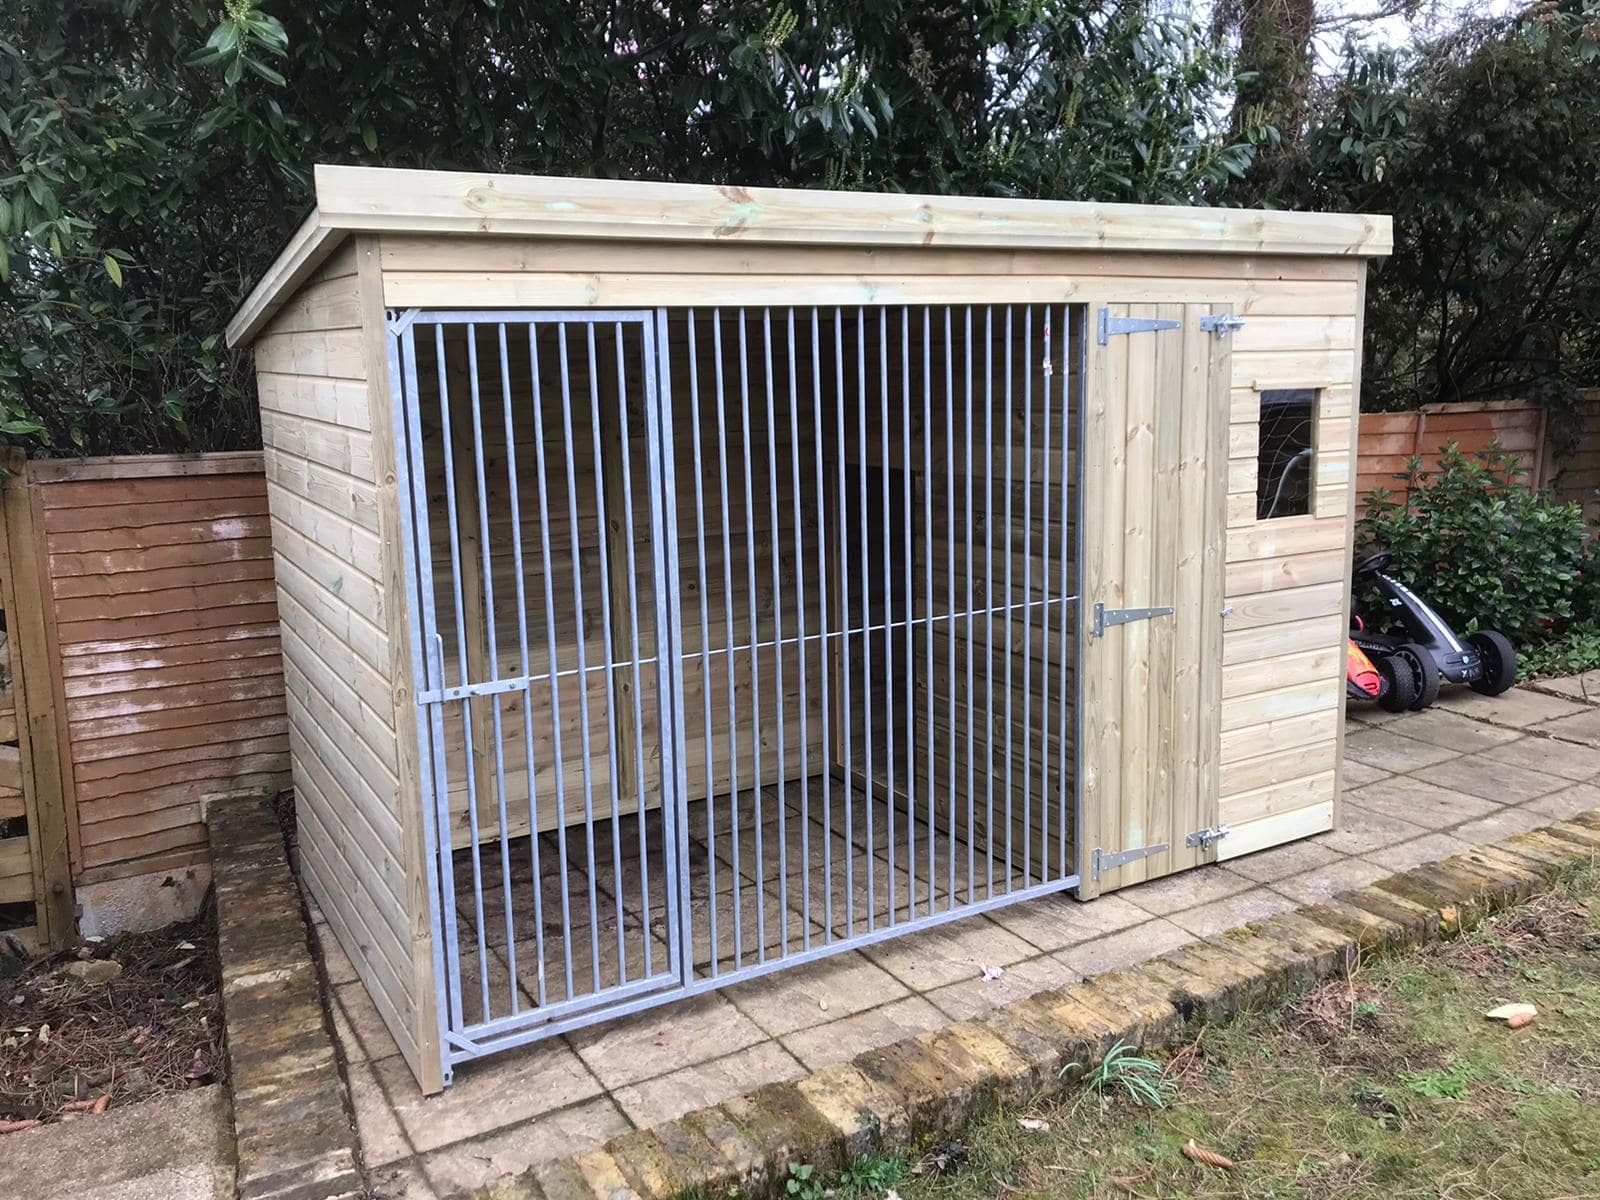 Stapeley Wooden Dog Kennel And Run 8ft (wide) x 6ft (deep) x 6'6ft (high)